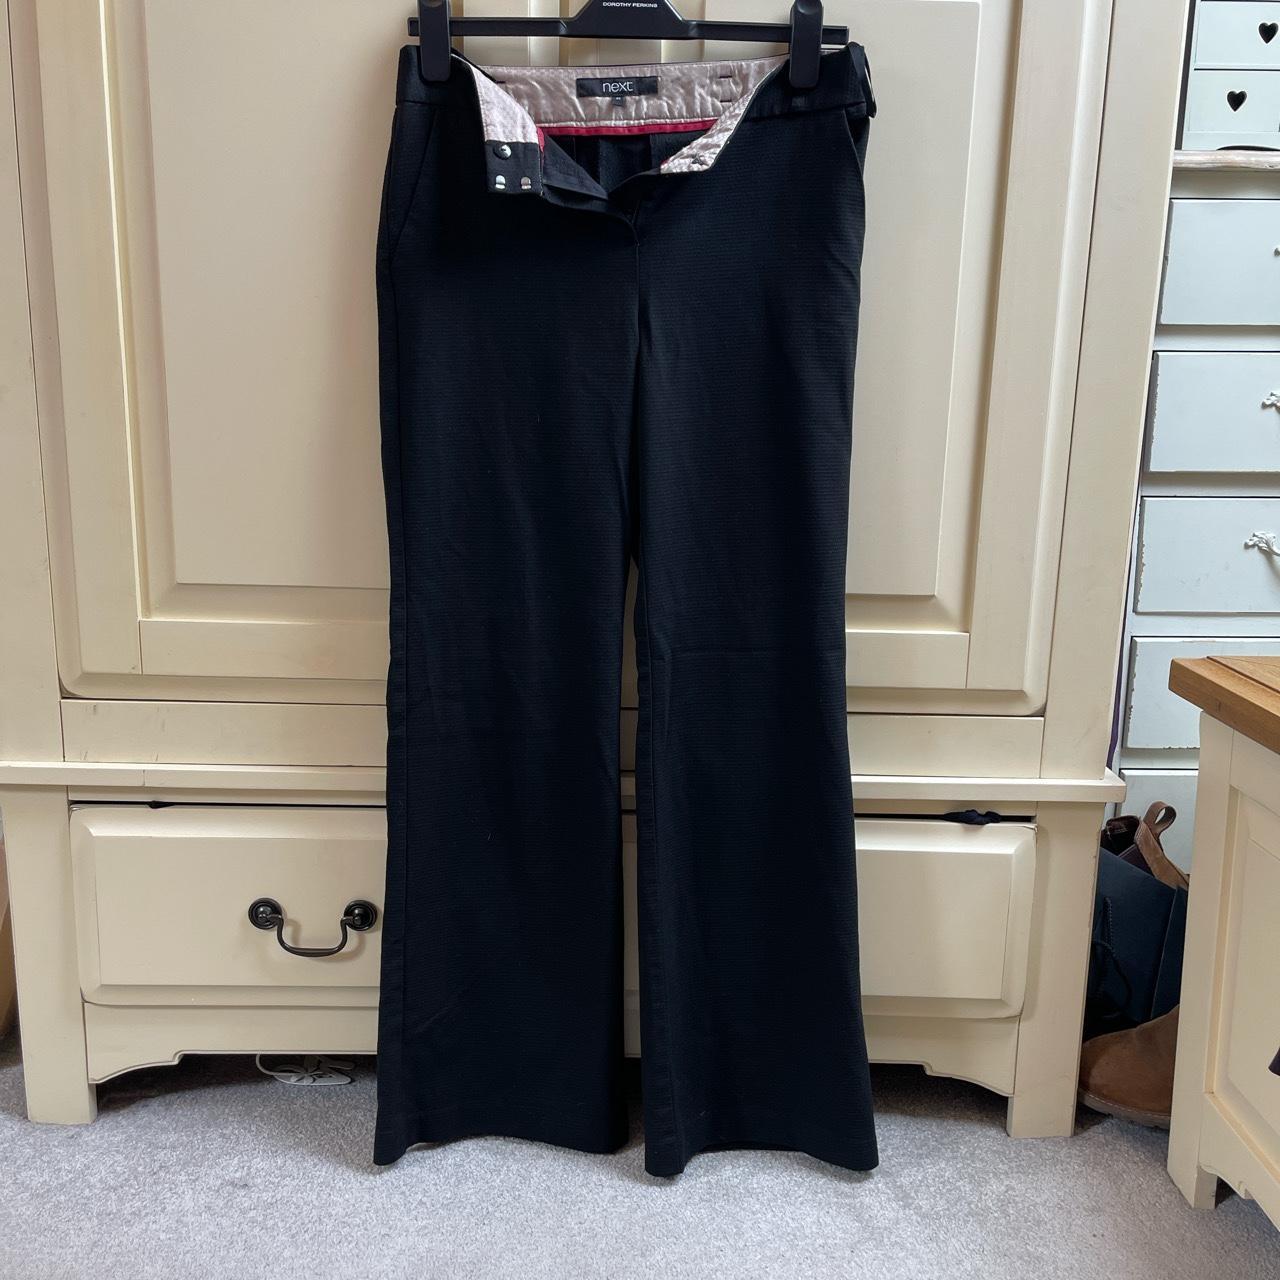 Next Womens Neutral Envelope Waist Trousers  Stockpoint Apparel Outlet